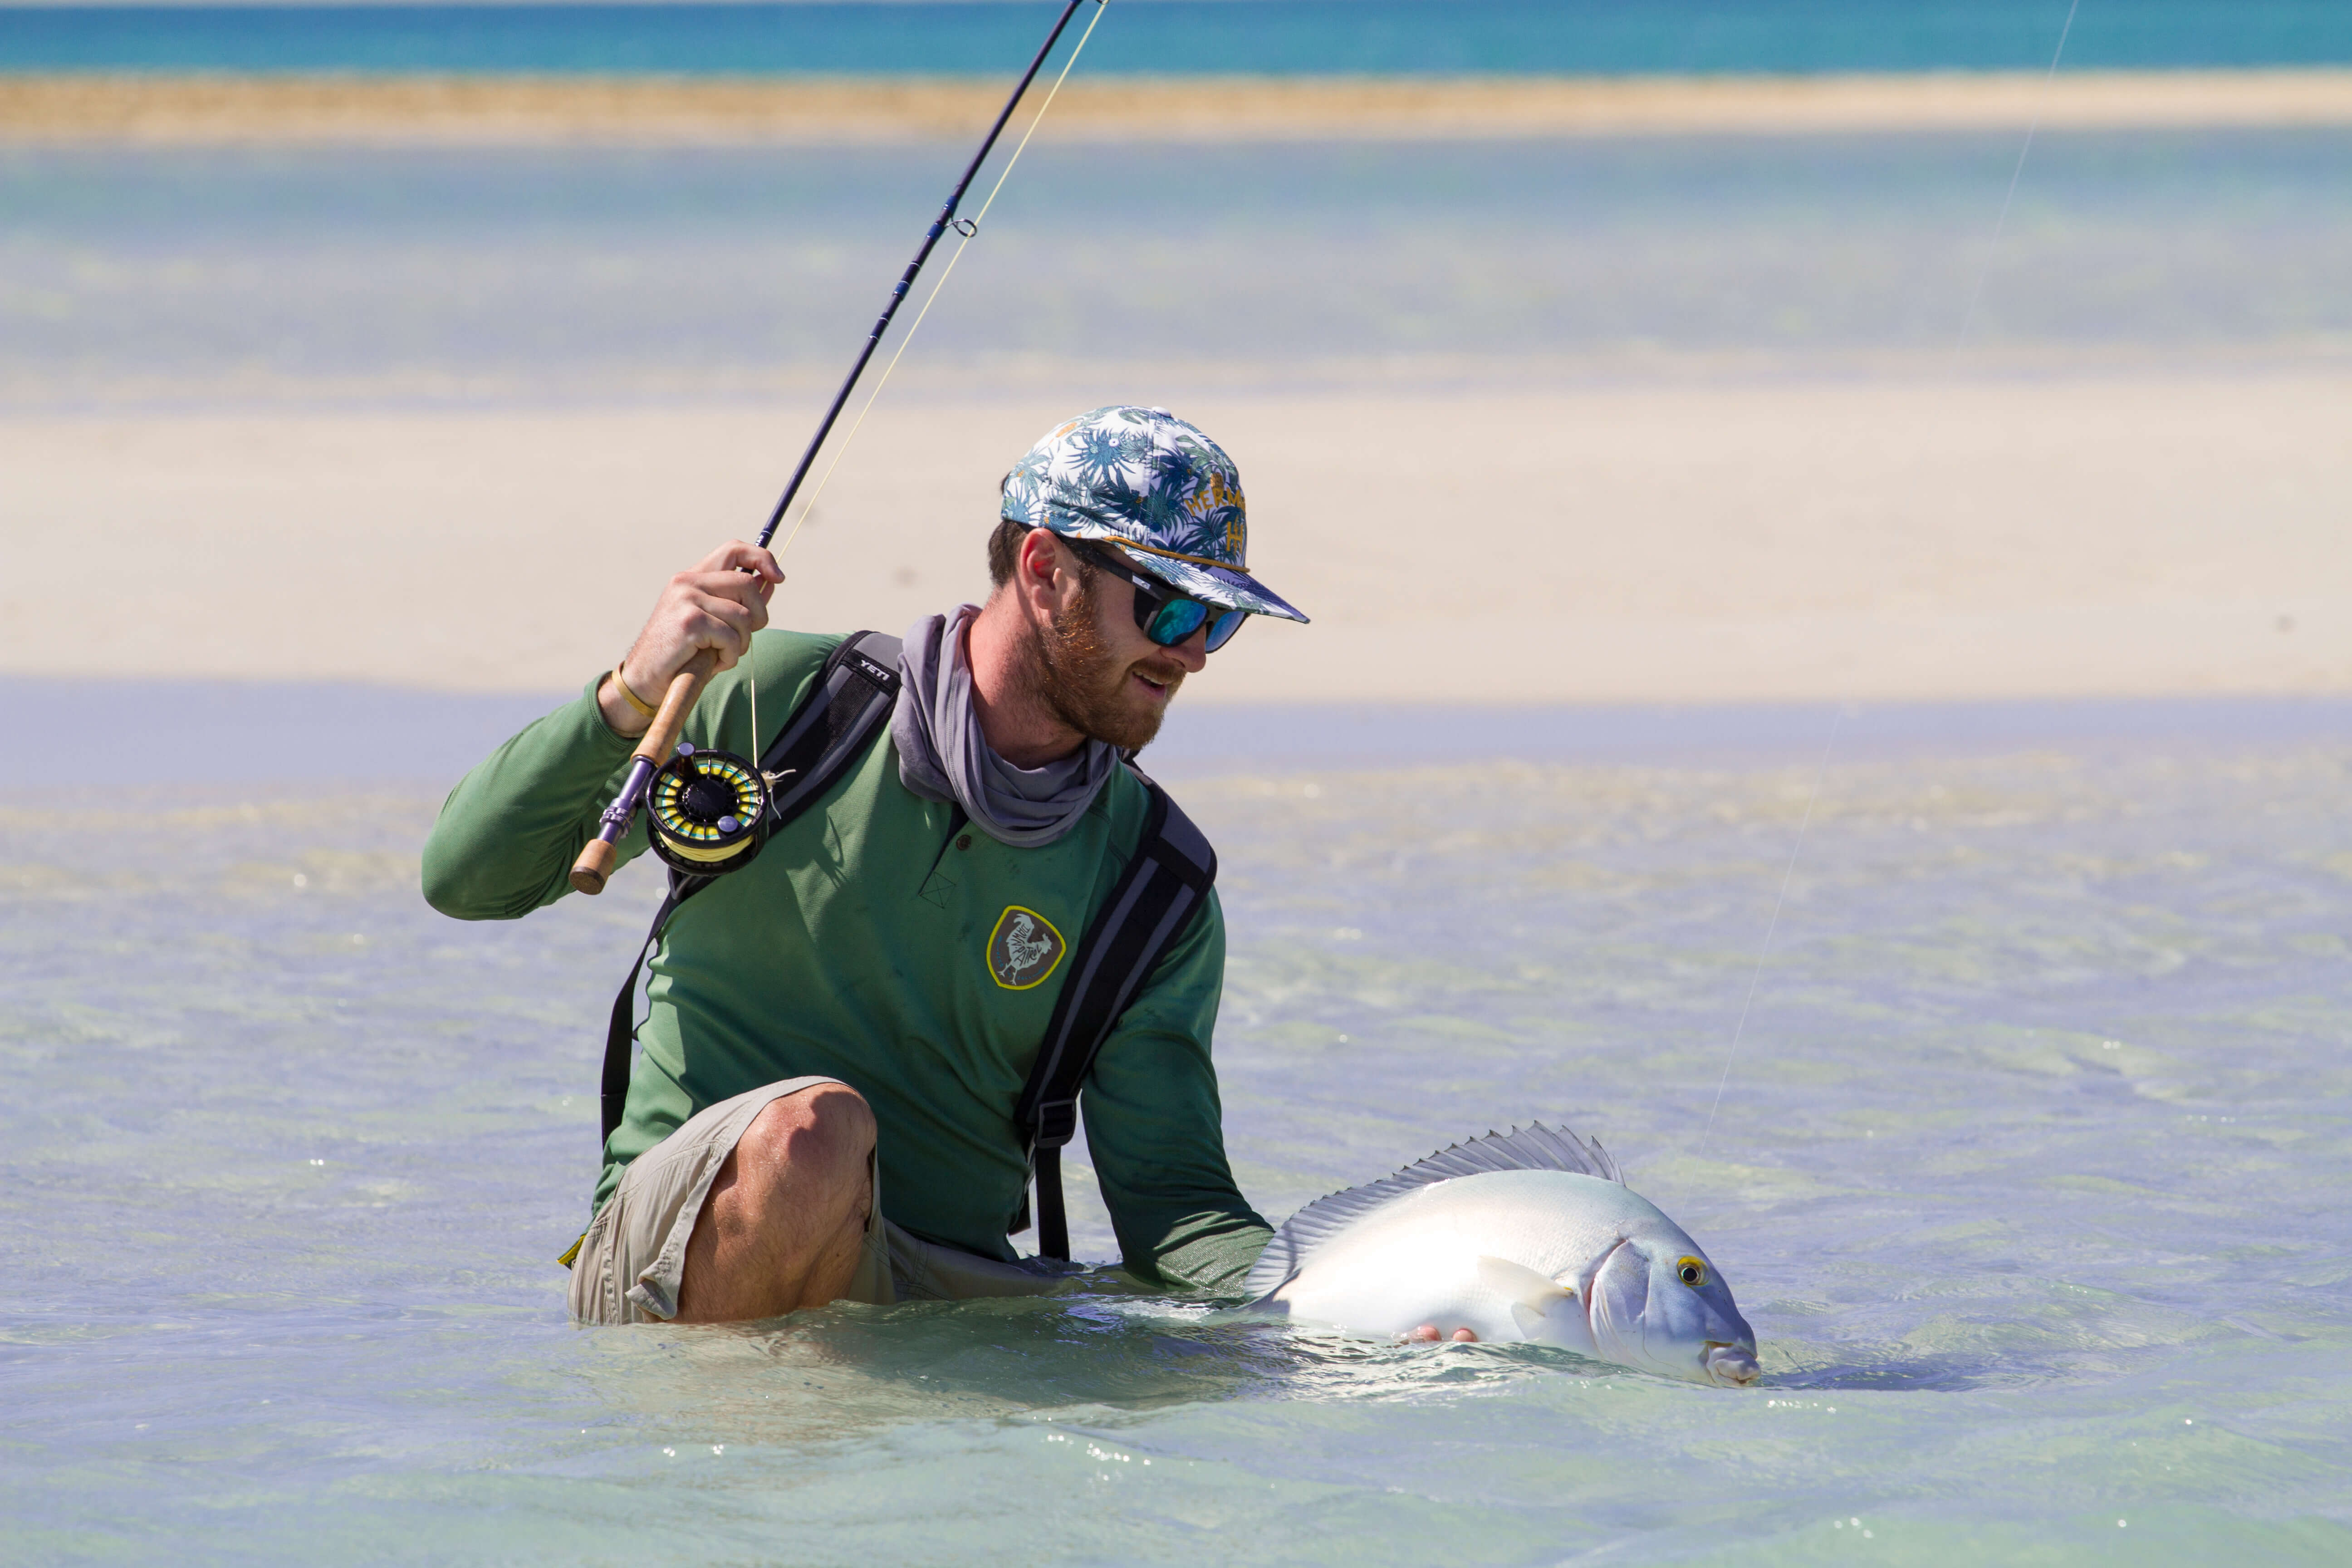 A fisherman kneeing in water holding his fly fishing rod and a fish he caught